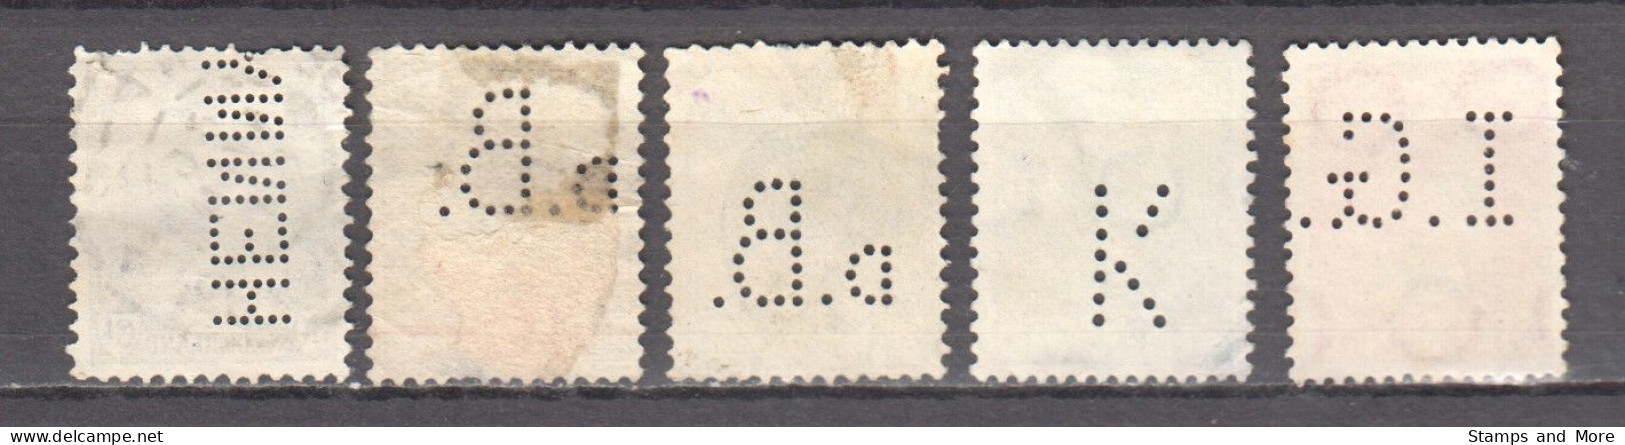 Netherlands - 5 Canceled Perfins Stamps - Perfins